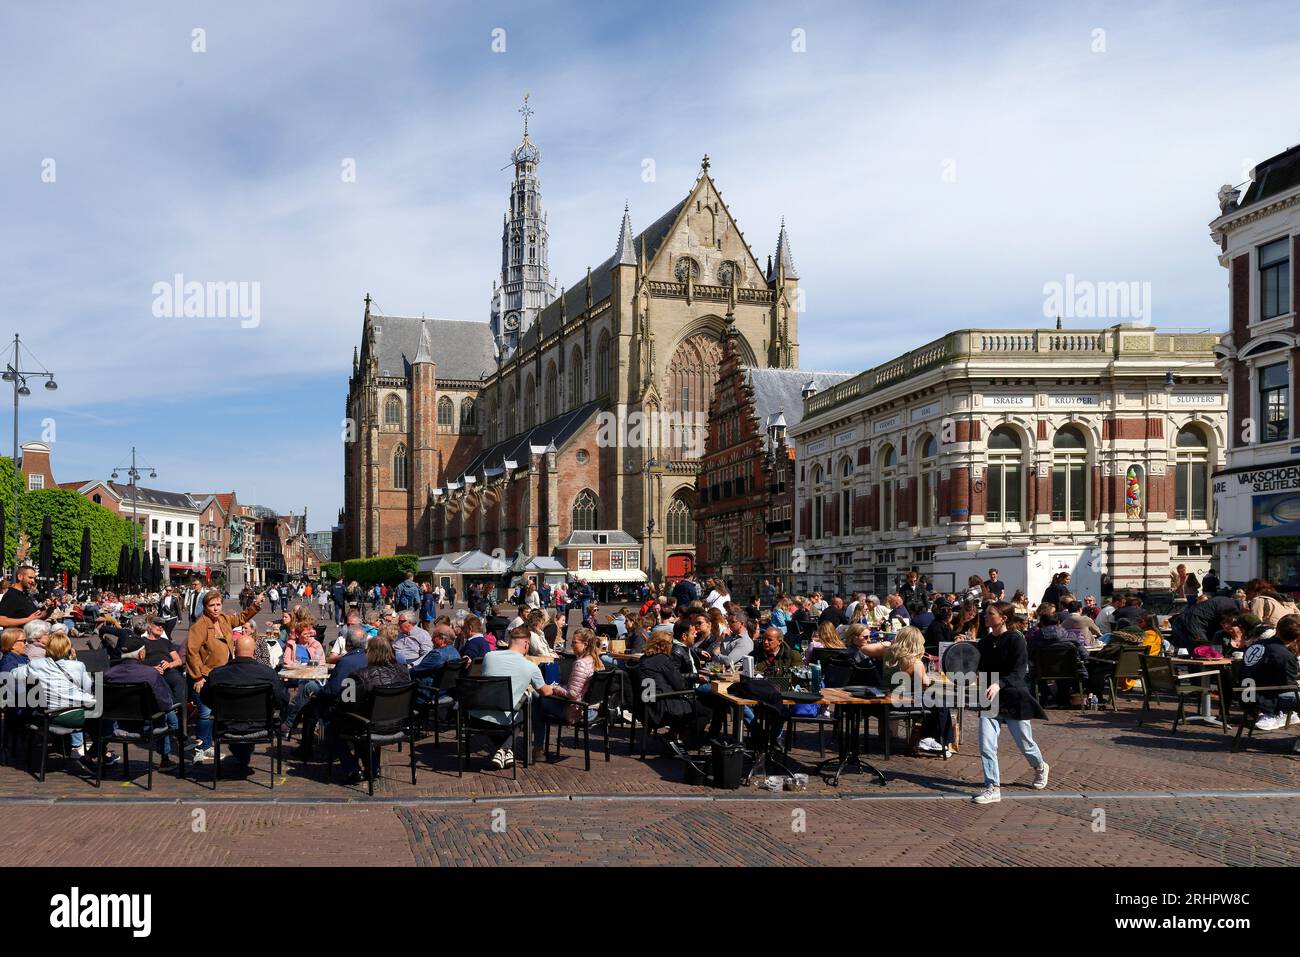 View of the Great or St. Bavo Church at the Grote Markt in the old town of Haarlem, Haarlem, North Holland, Noord-Holland, Benelux, Benelux countries, Netherlands Stock Photo